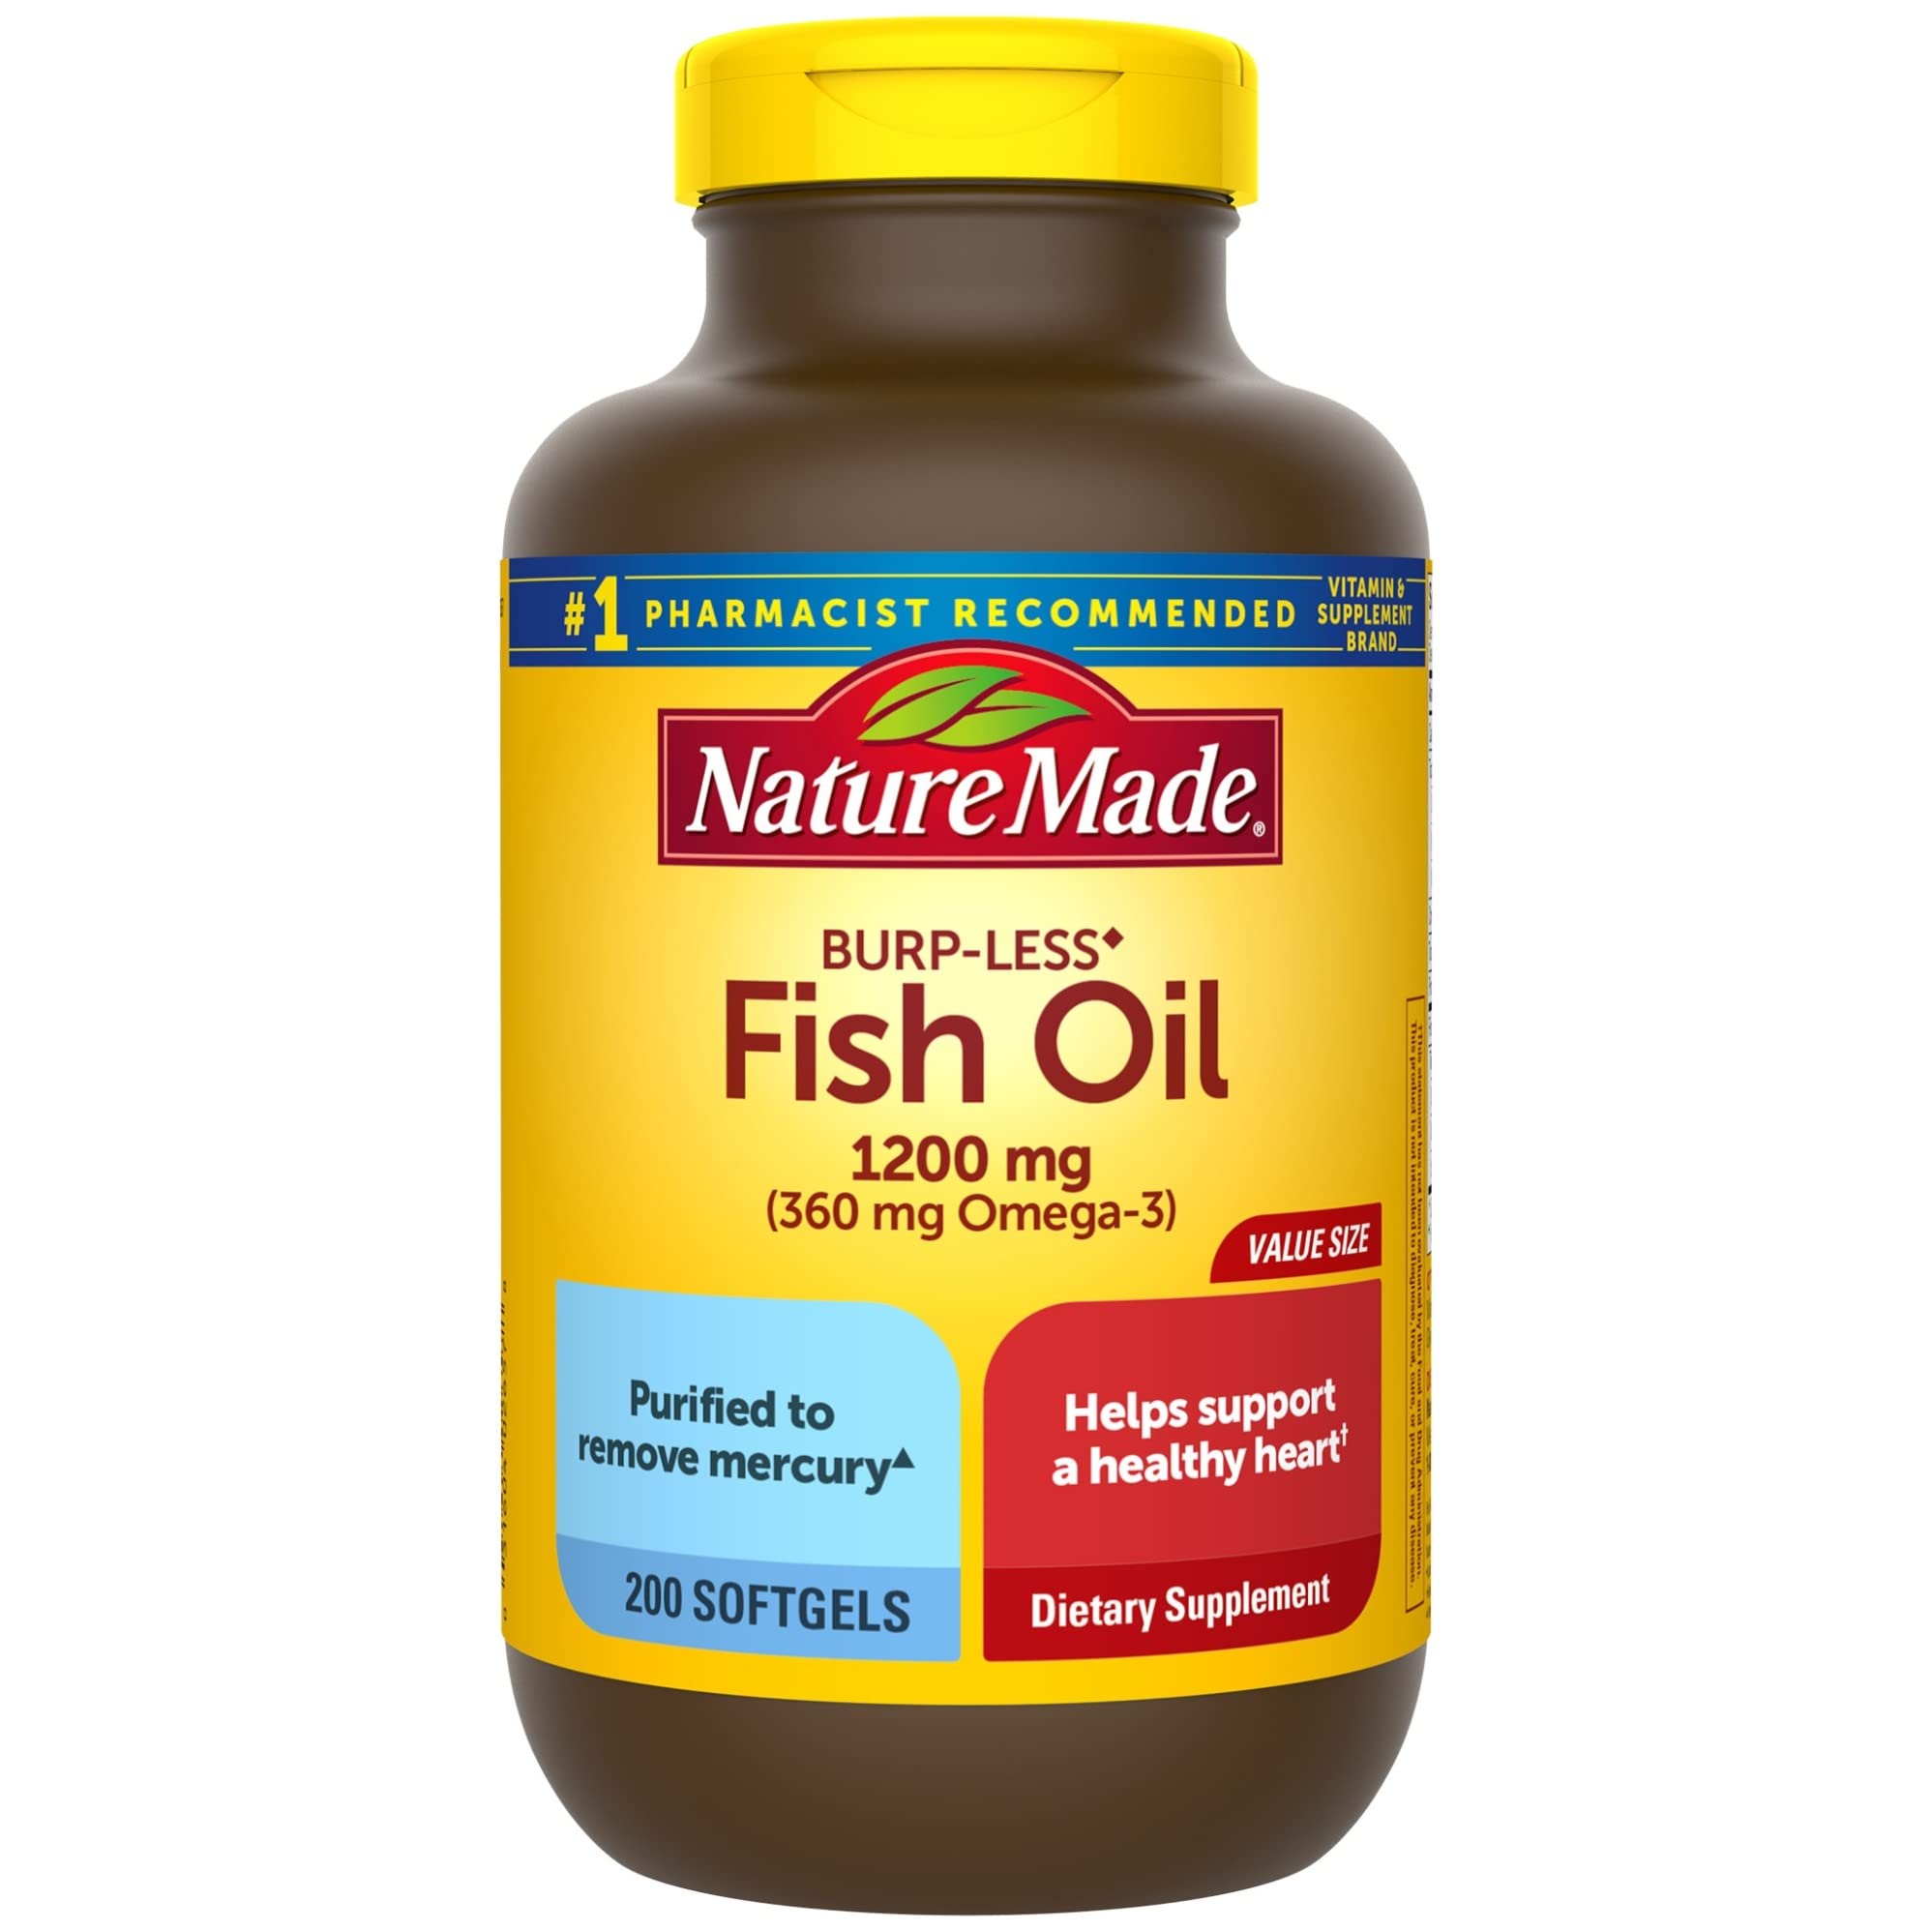 Nature Made Burp Less Fish Oil 1200 mg, Fish Oil Supplements, Omega 3 Fish Oil for Healthy Heart Support, Omega 3 Supplement with 200 Softgels, 100 Day Supply